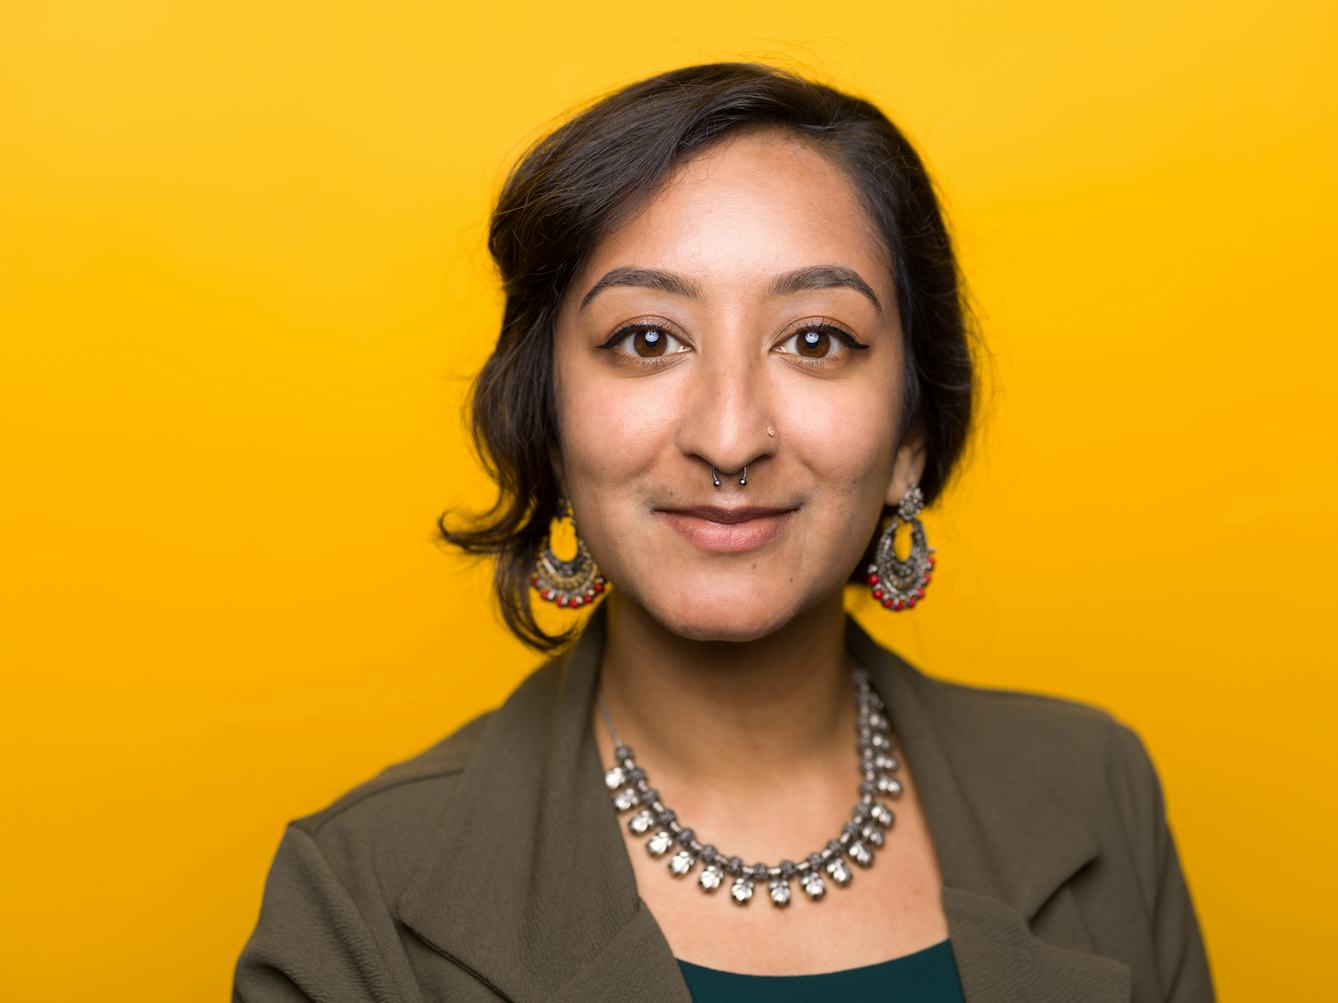 Close-up photographic portrait of Shelley Angelie Saggar's face and shoulders, against a yellow background.